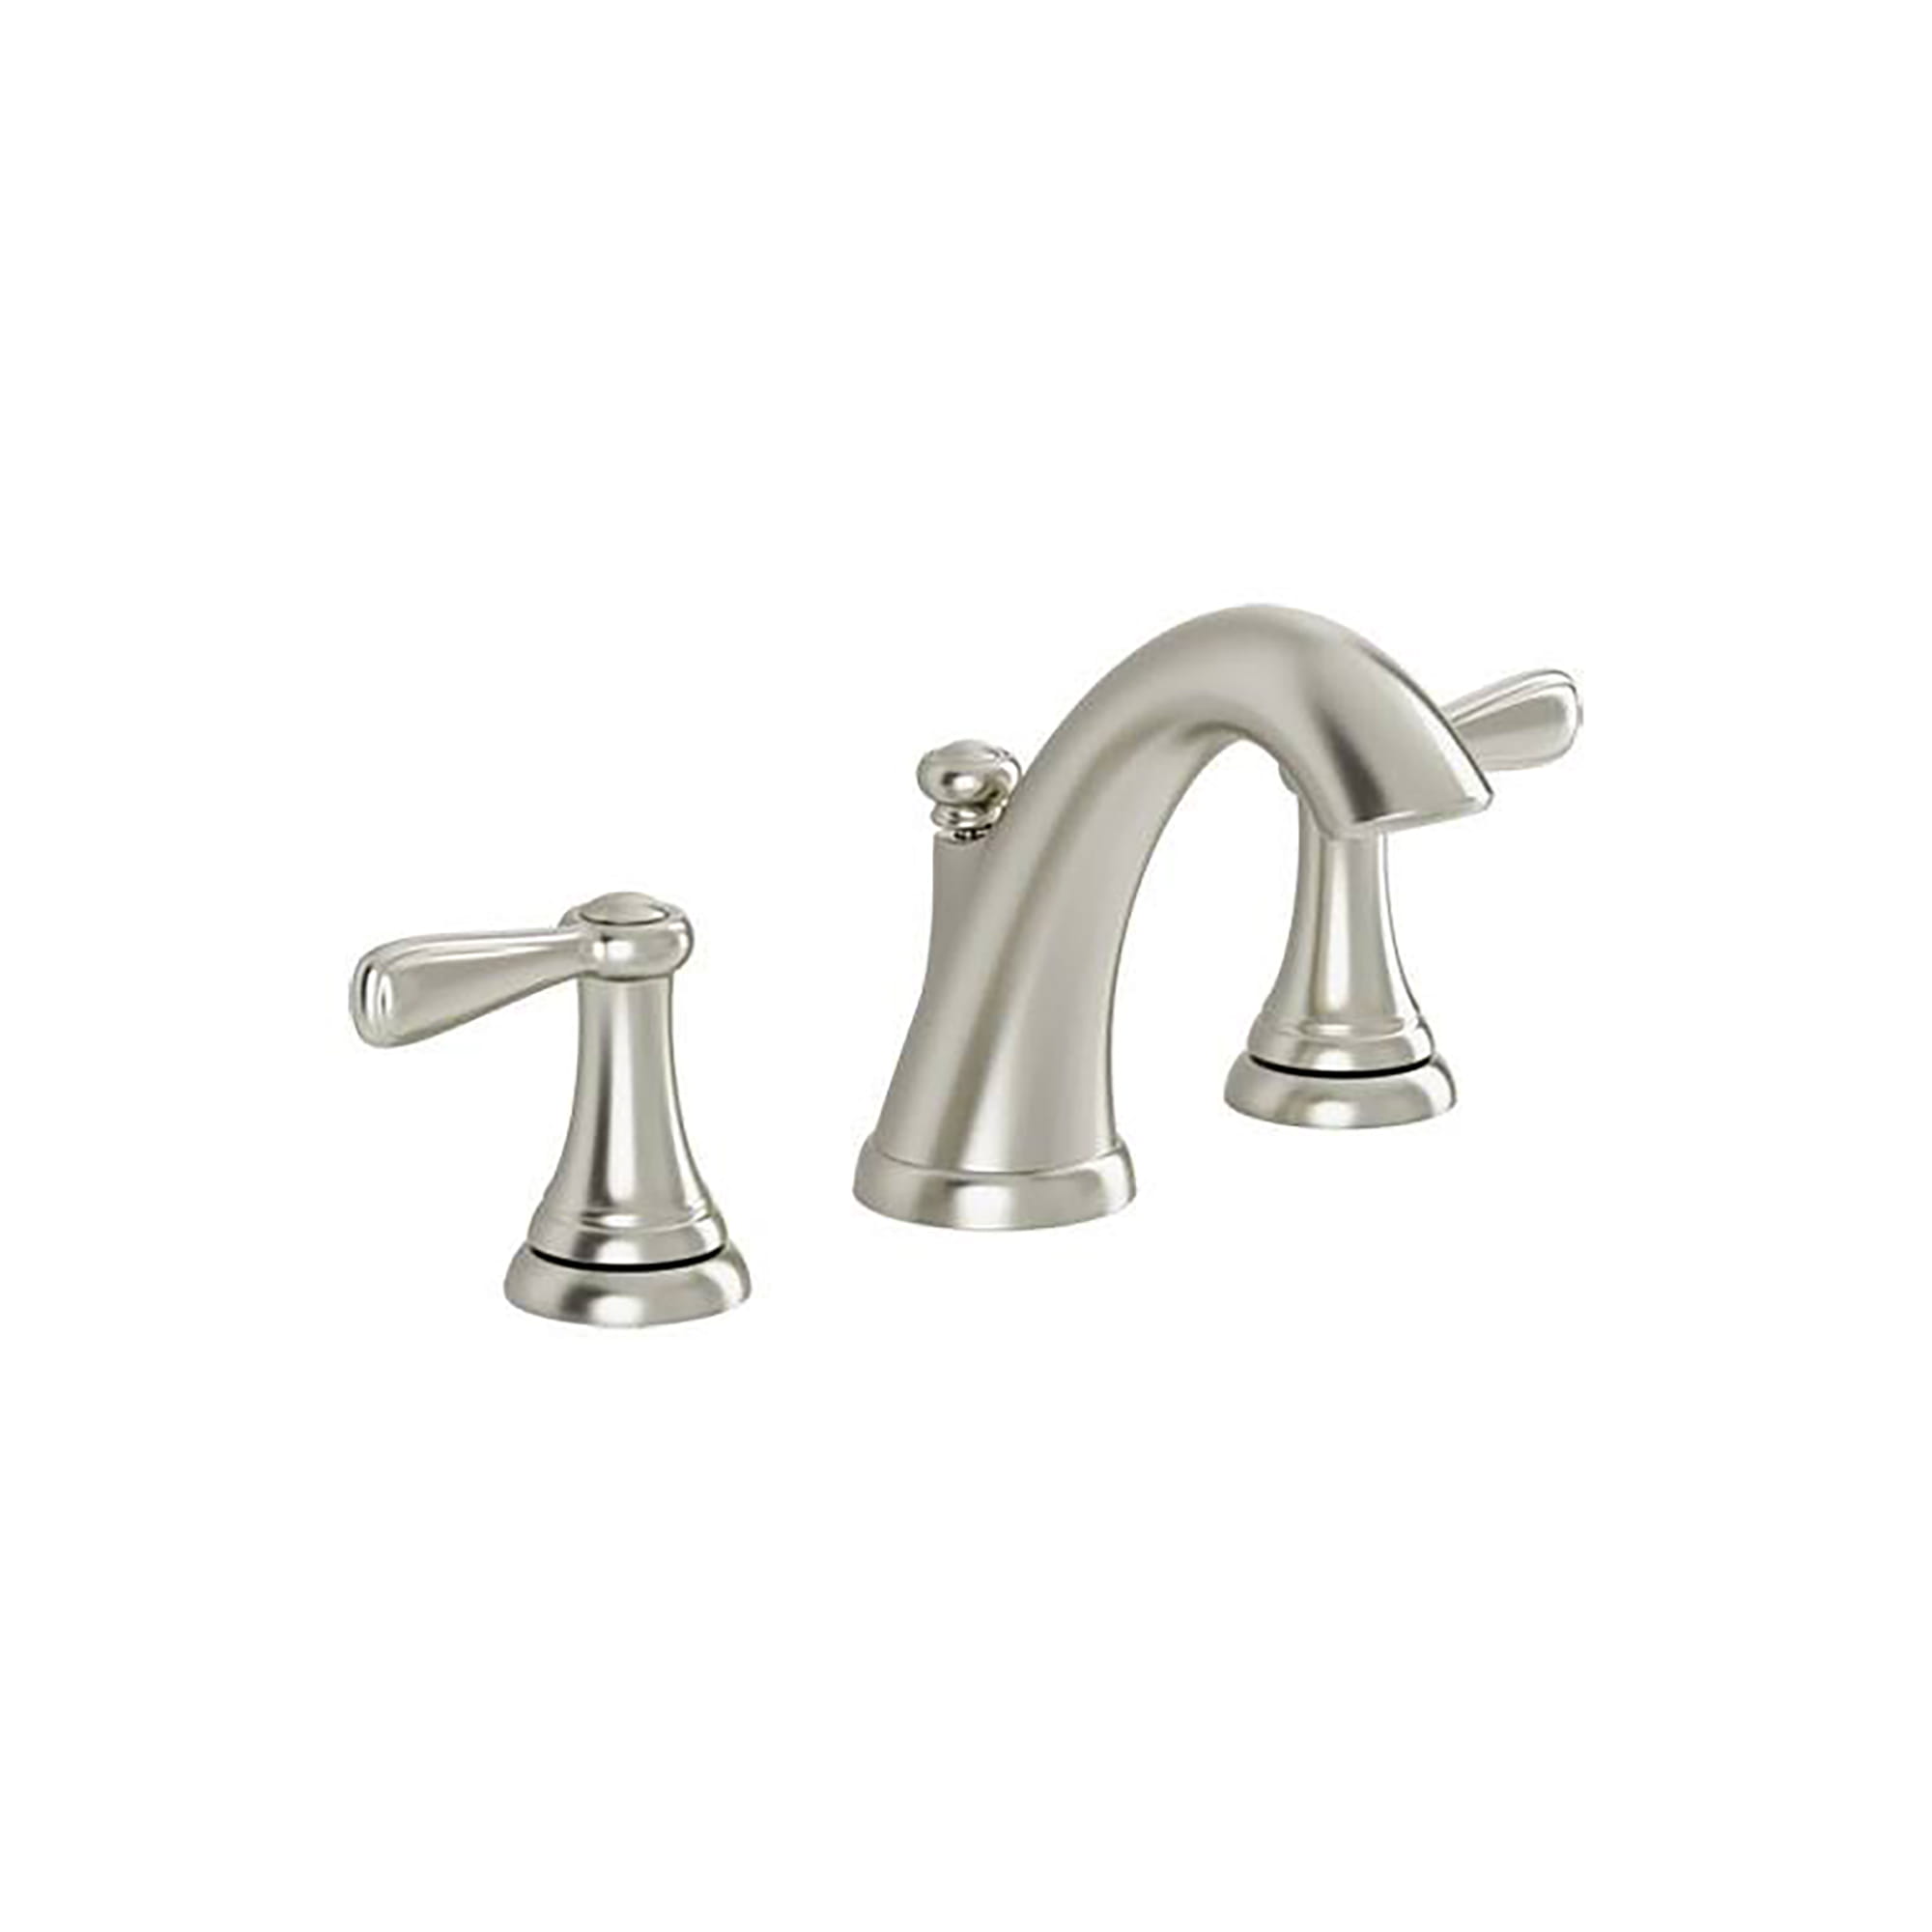 Marquette 8-Inch Widespread 2-Handle Bathroom Faucet 1.5 GPM with Drain